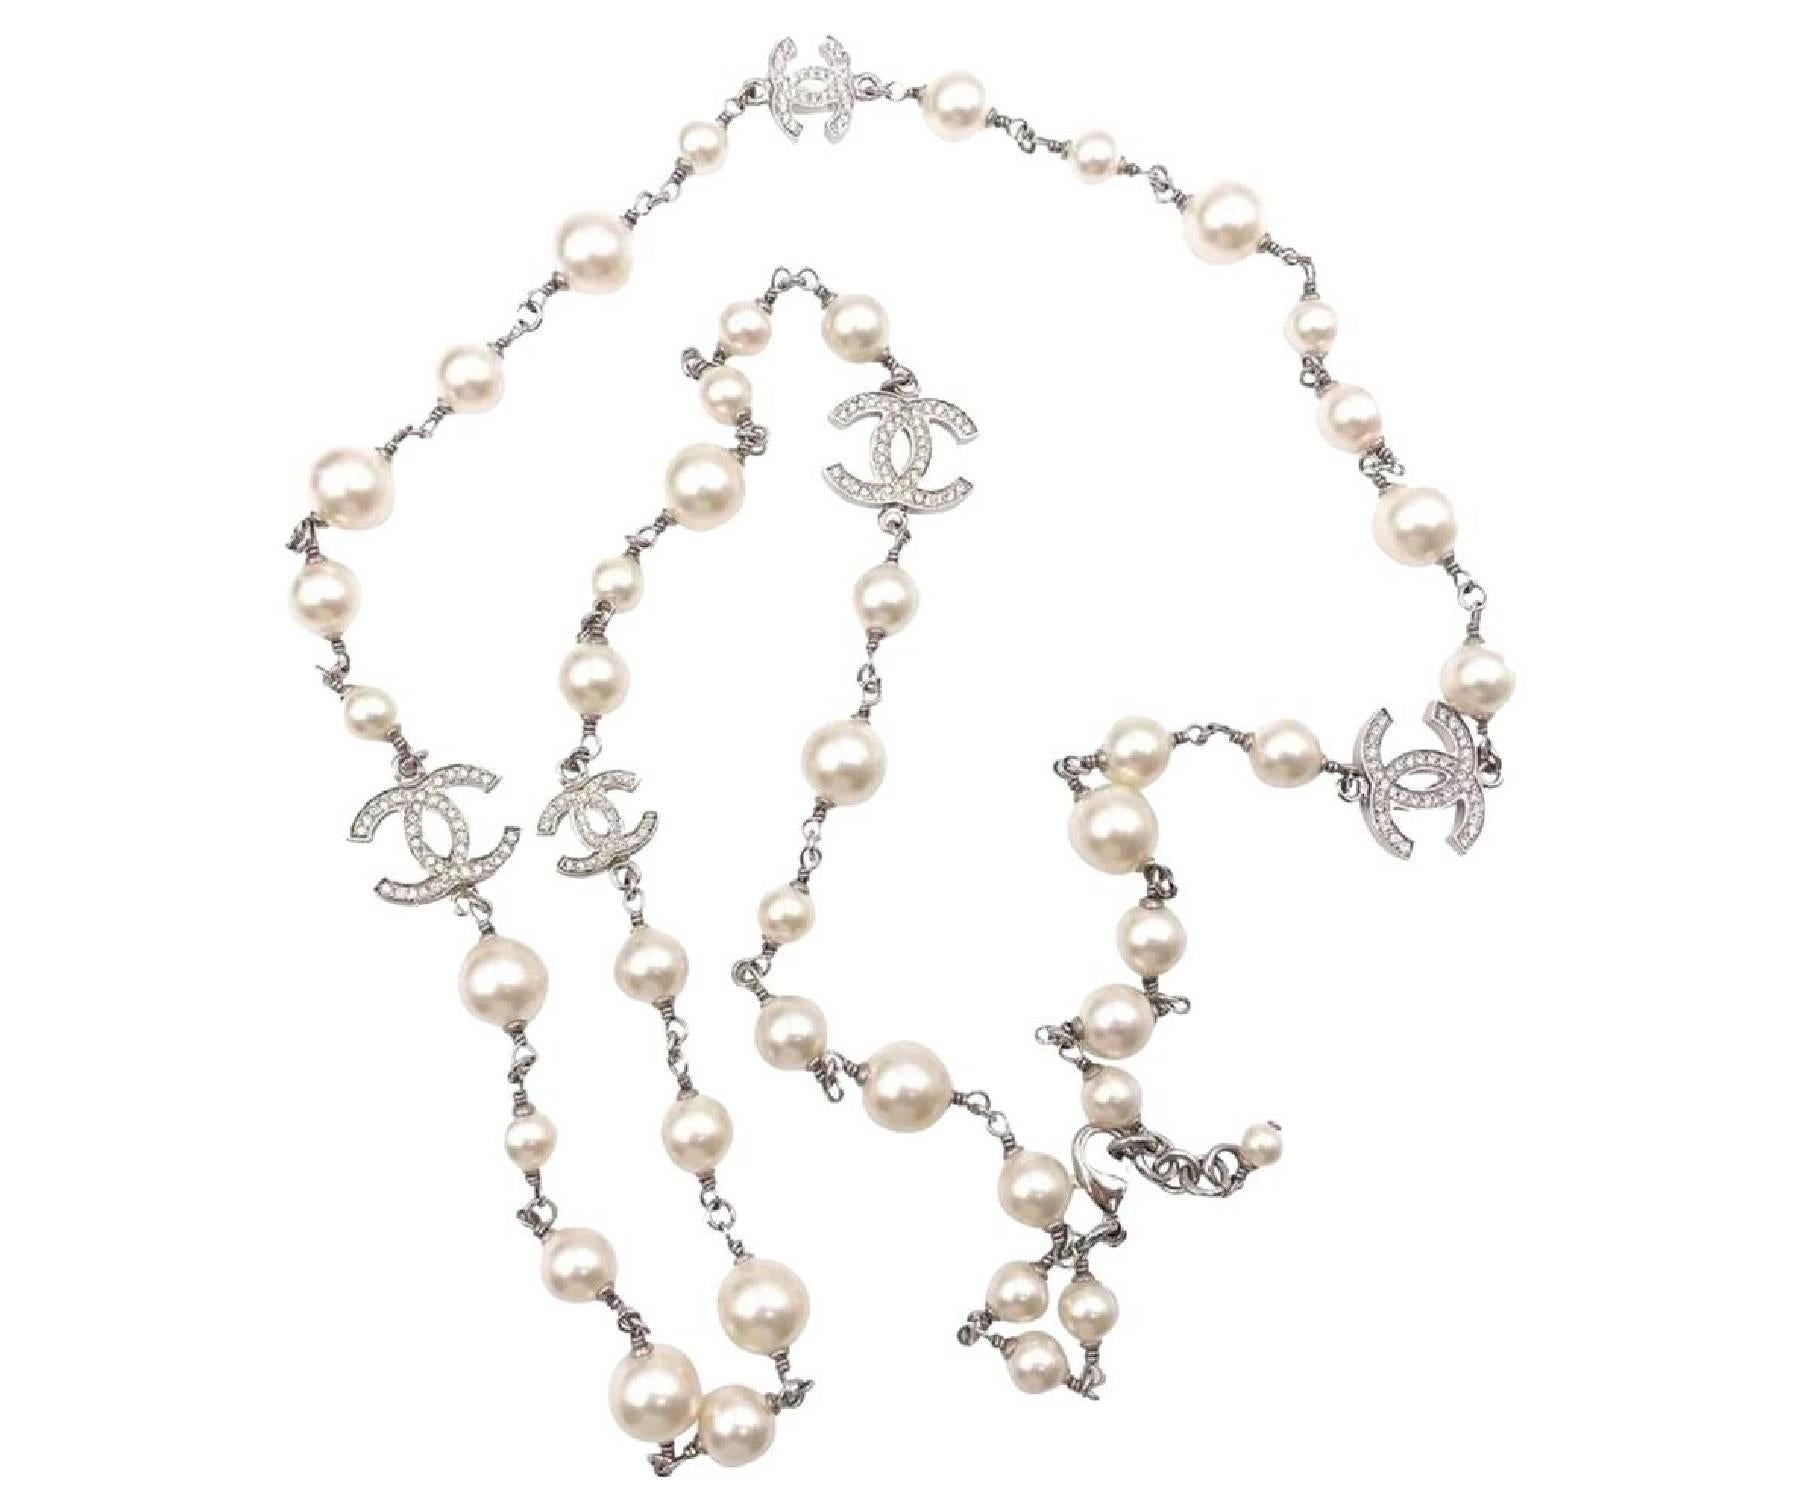 Chanel 5 Silver CC Crystal Faux Pearl Long Necklace

* Marked 16
* Made in France
* Comes with the original dustbag

-It is approximately 42